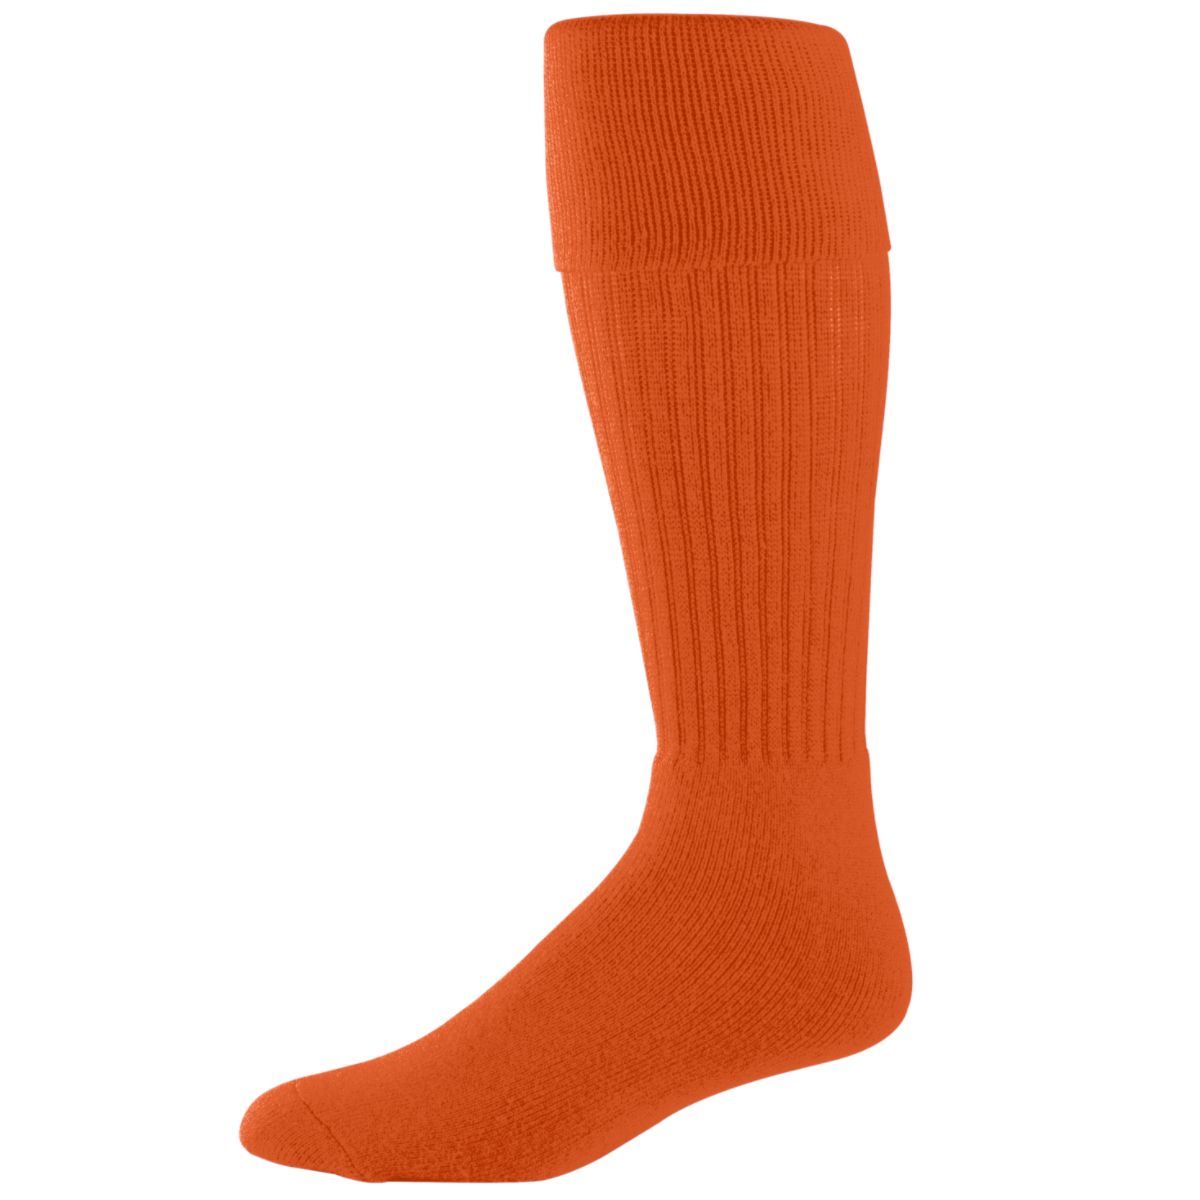 Augusta Sportswear Soccer Sock in Orange  -Part of the Accessories, Augusta-Products, Accessories-Socks, Soccer, All-Sports-1 product lines at KanaleyCreations.com